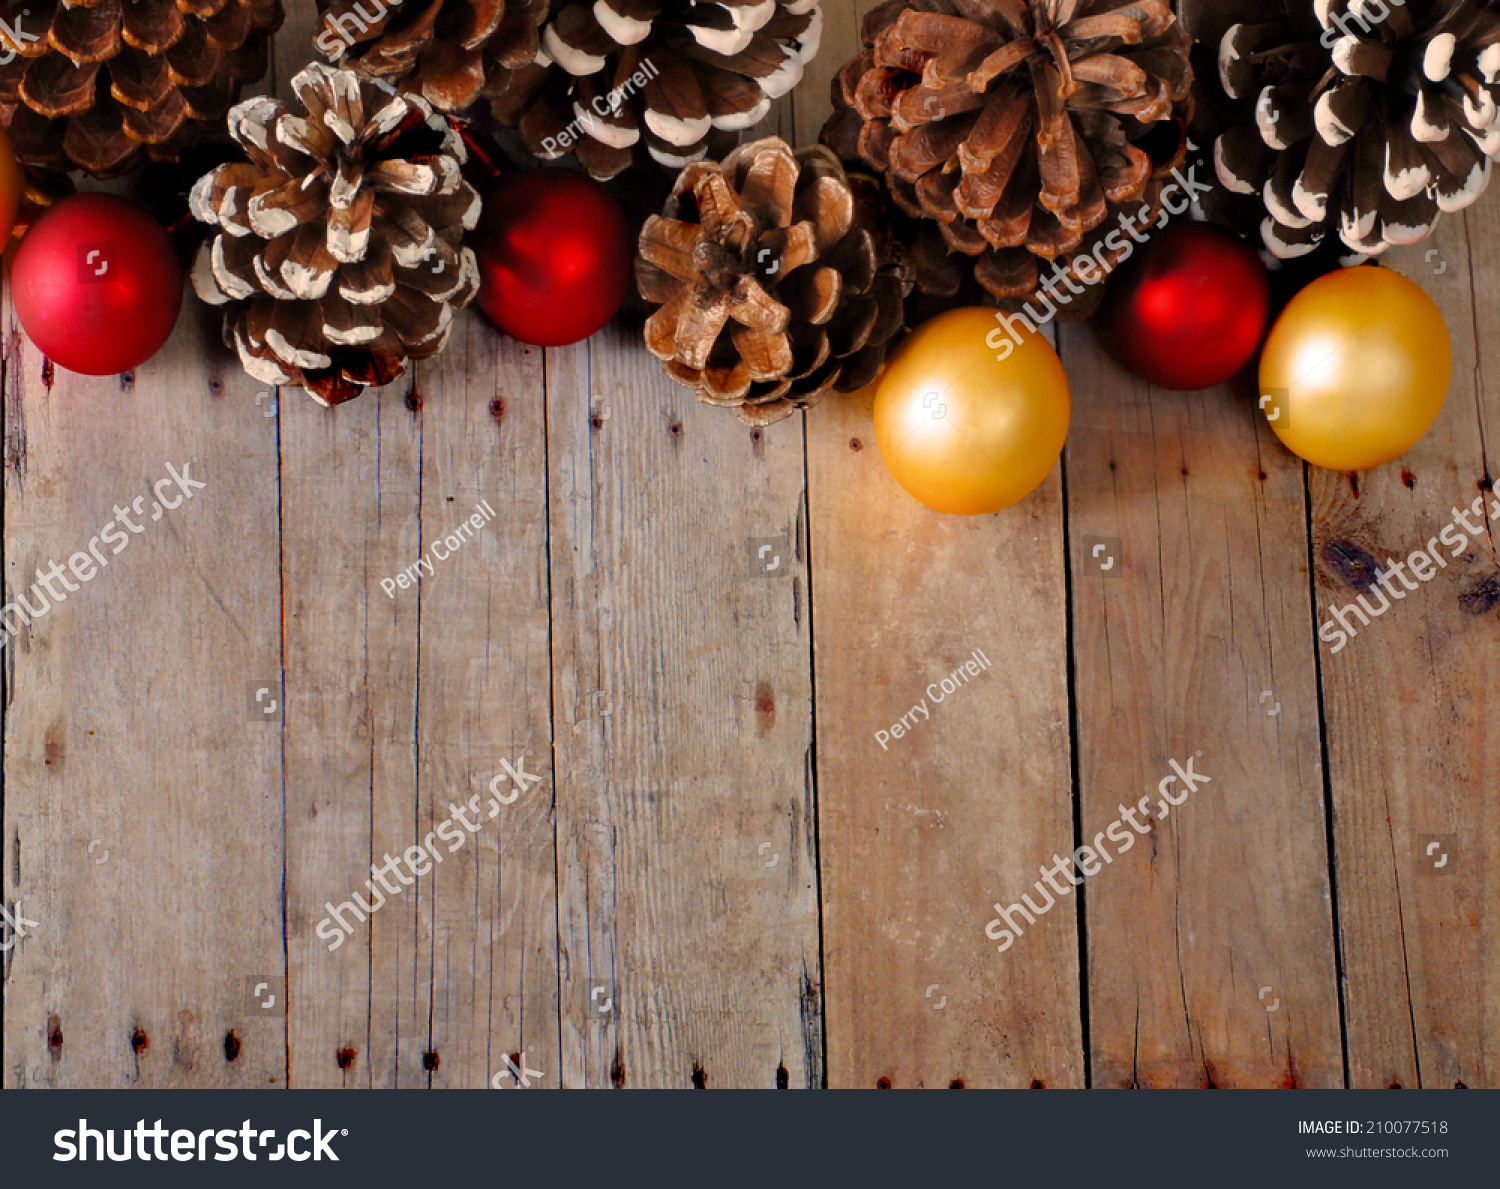 Christmas background of pine cones and Christmas balls on a rustic wooden surface. The decorations are gold and red. Some of the pine cones have fake snow tipped scales. Plenty of copy space #210077518